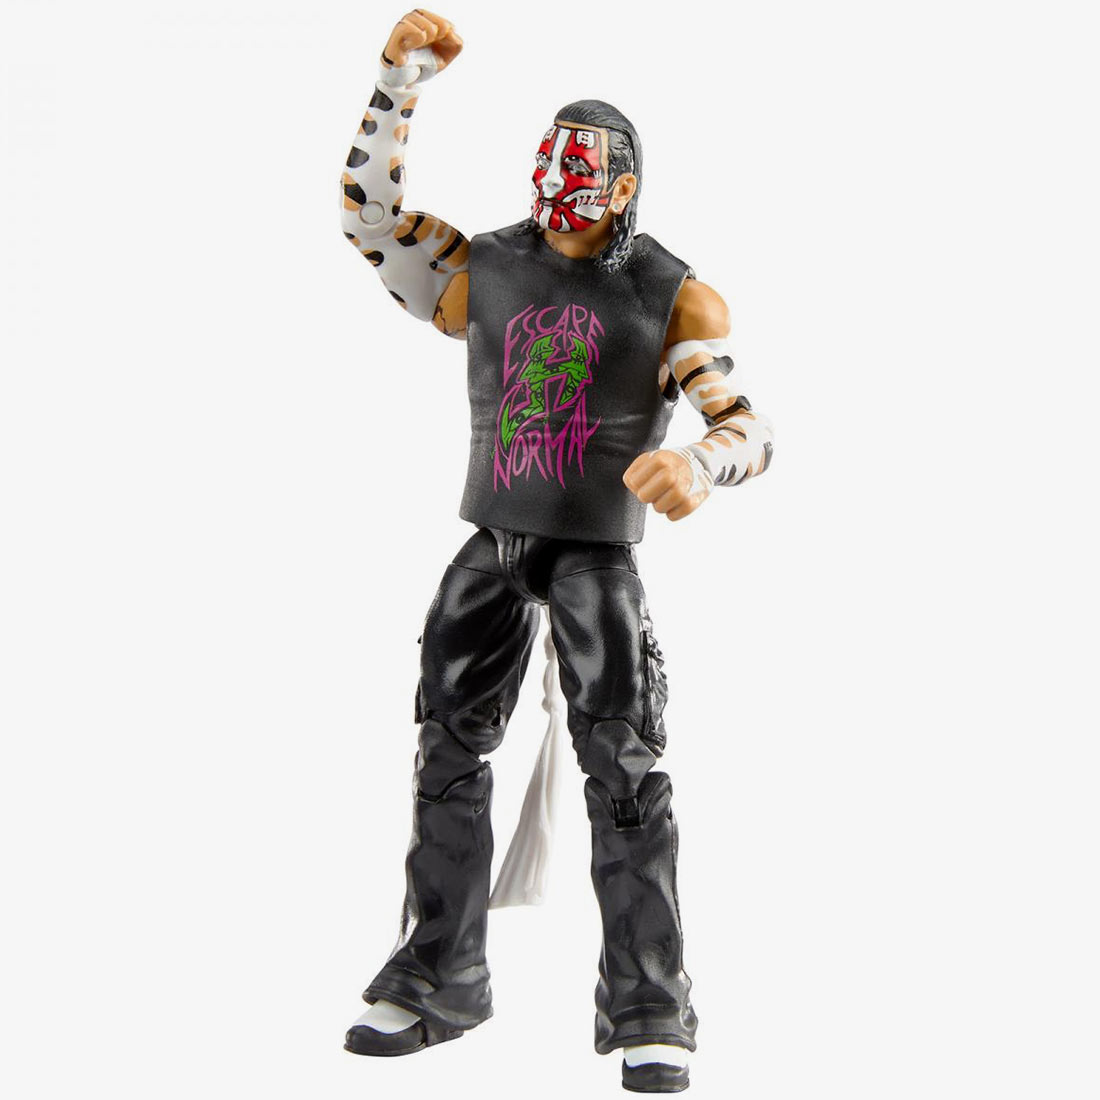 Jeff Hardy WWE Elite Collection Series #84 (Chase variant)